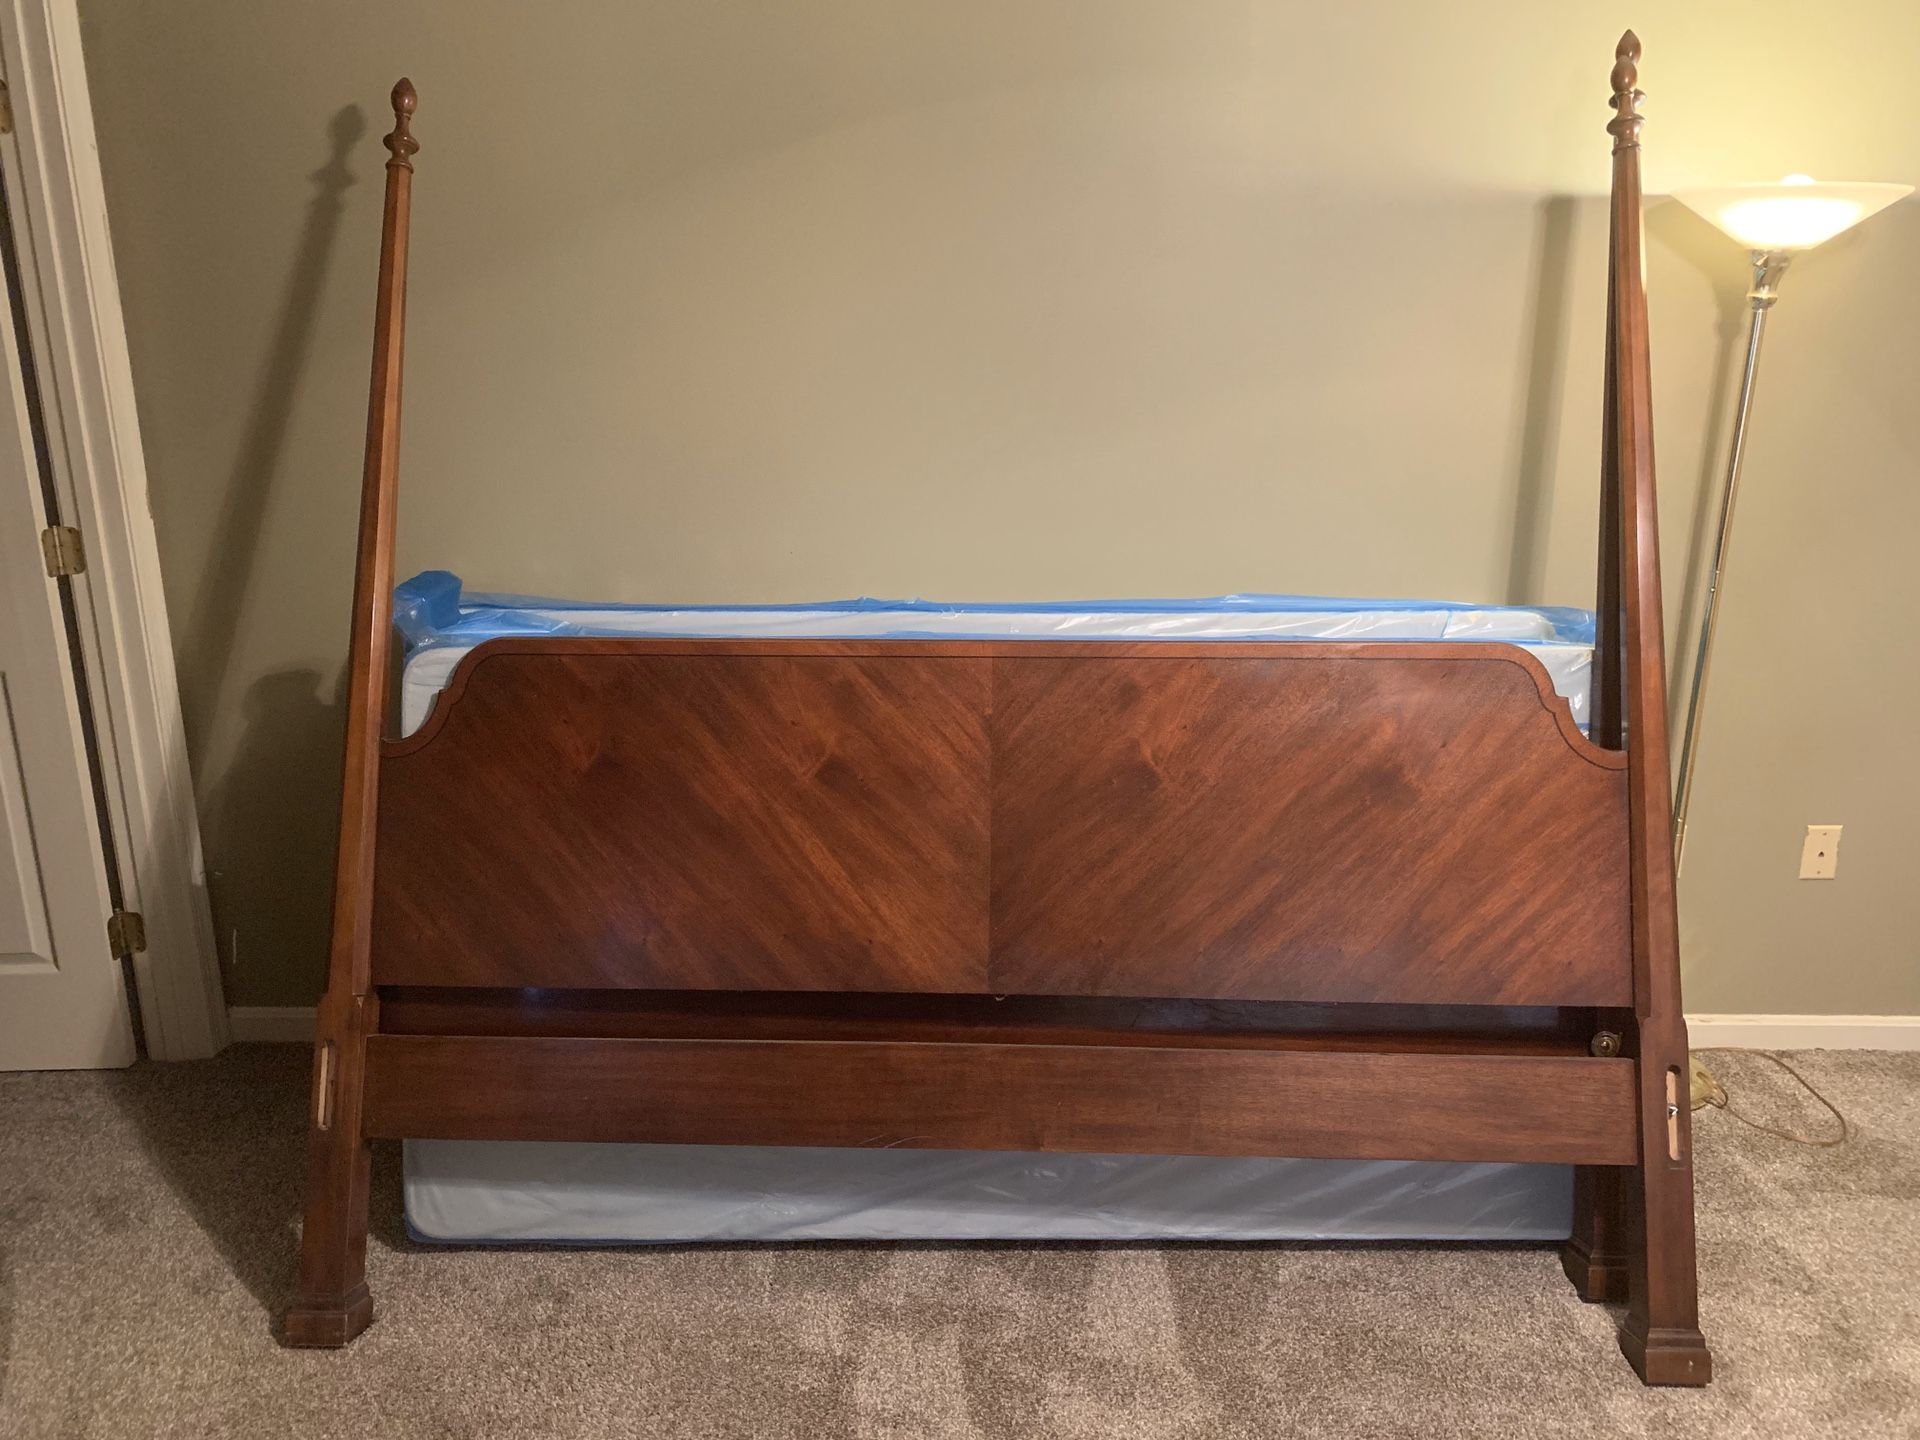 Chippendale 4 poster King bed frame and 2 nightstands by Drexel Heritage